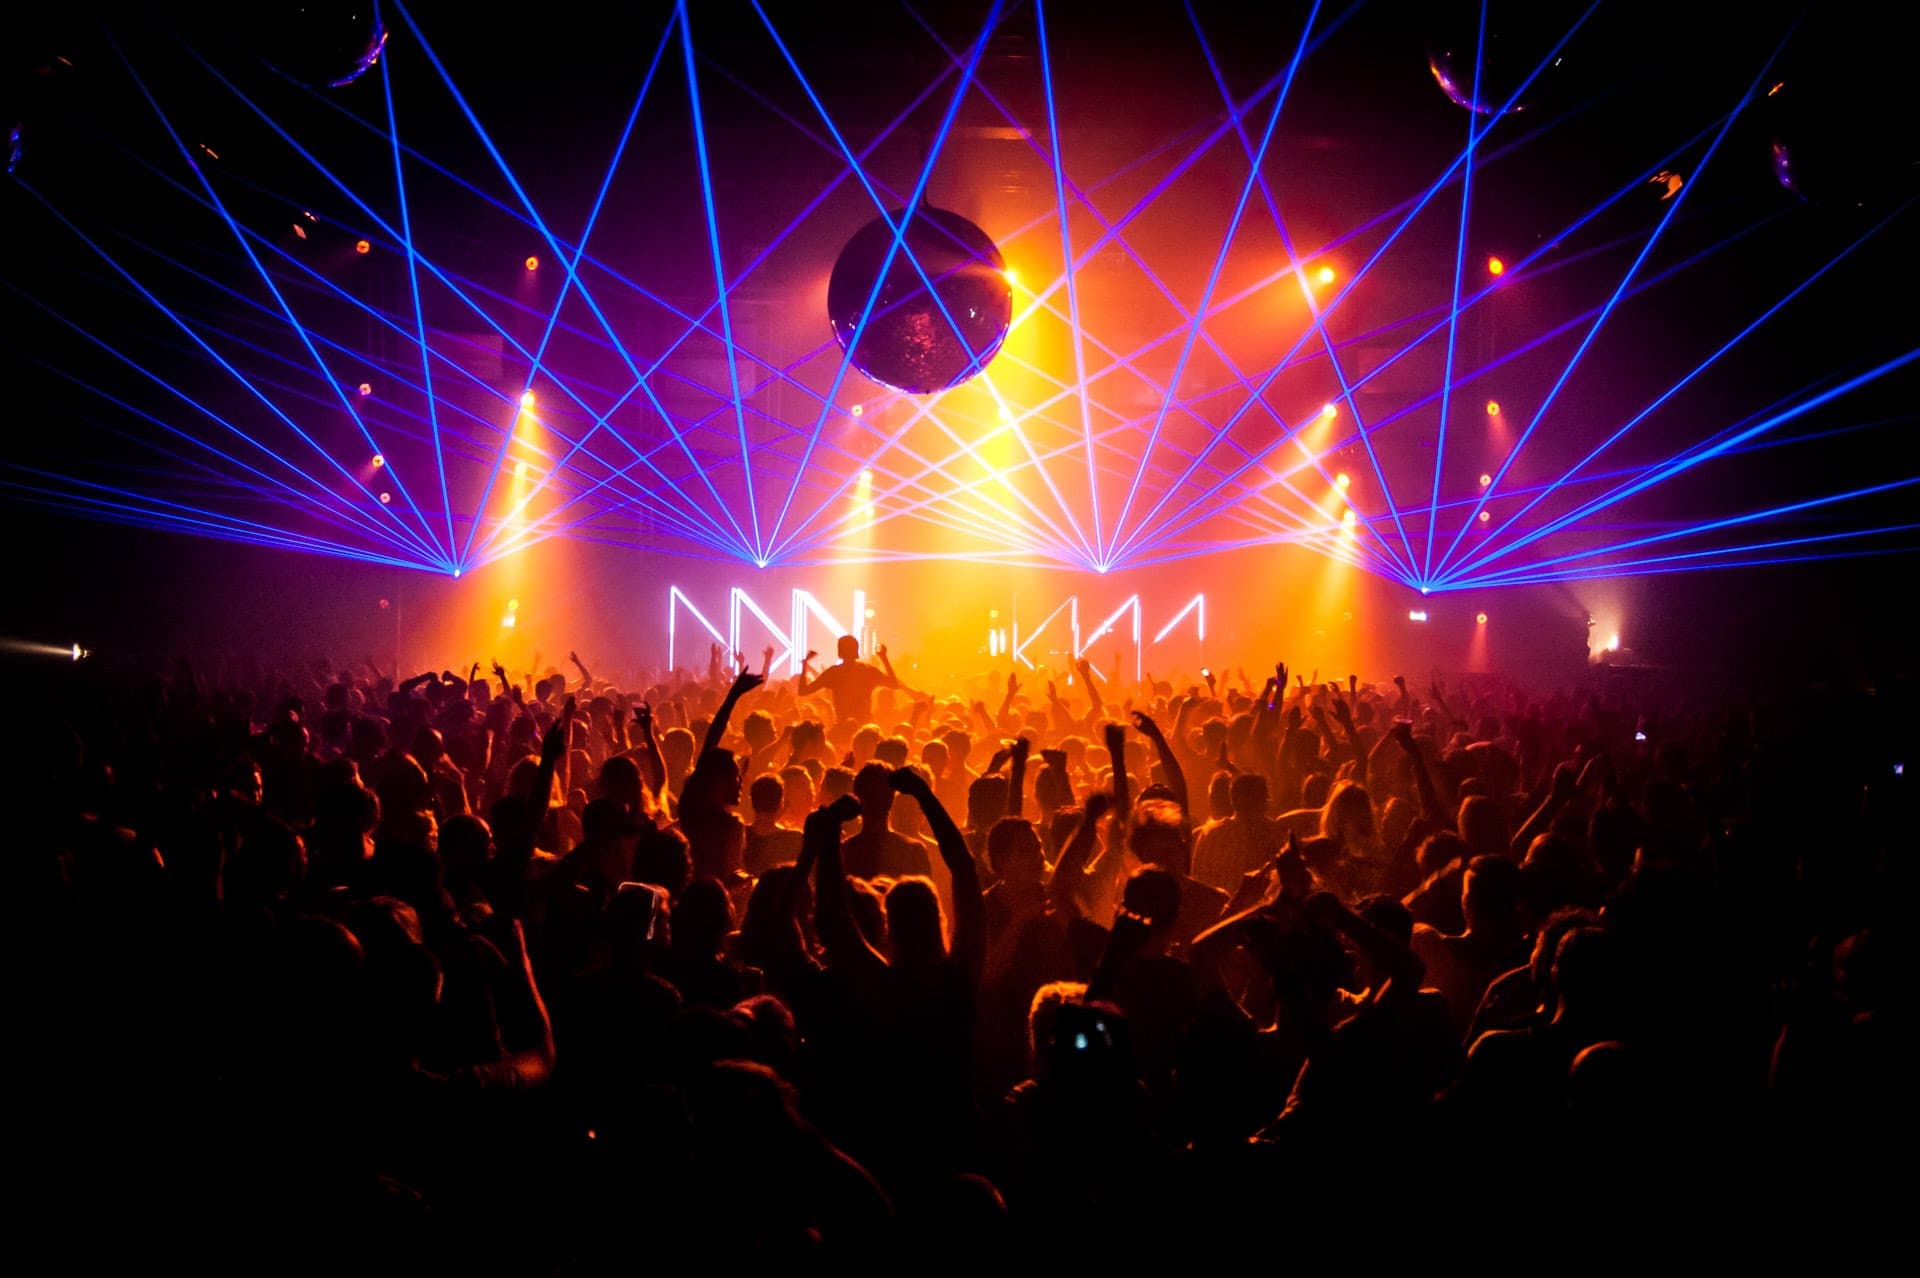 Amsterdam Dance Event reached a record 500 000 visitors